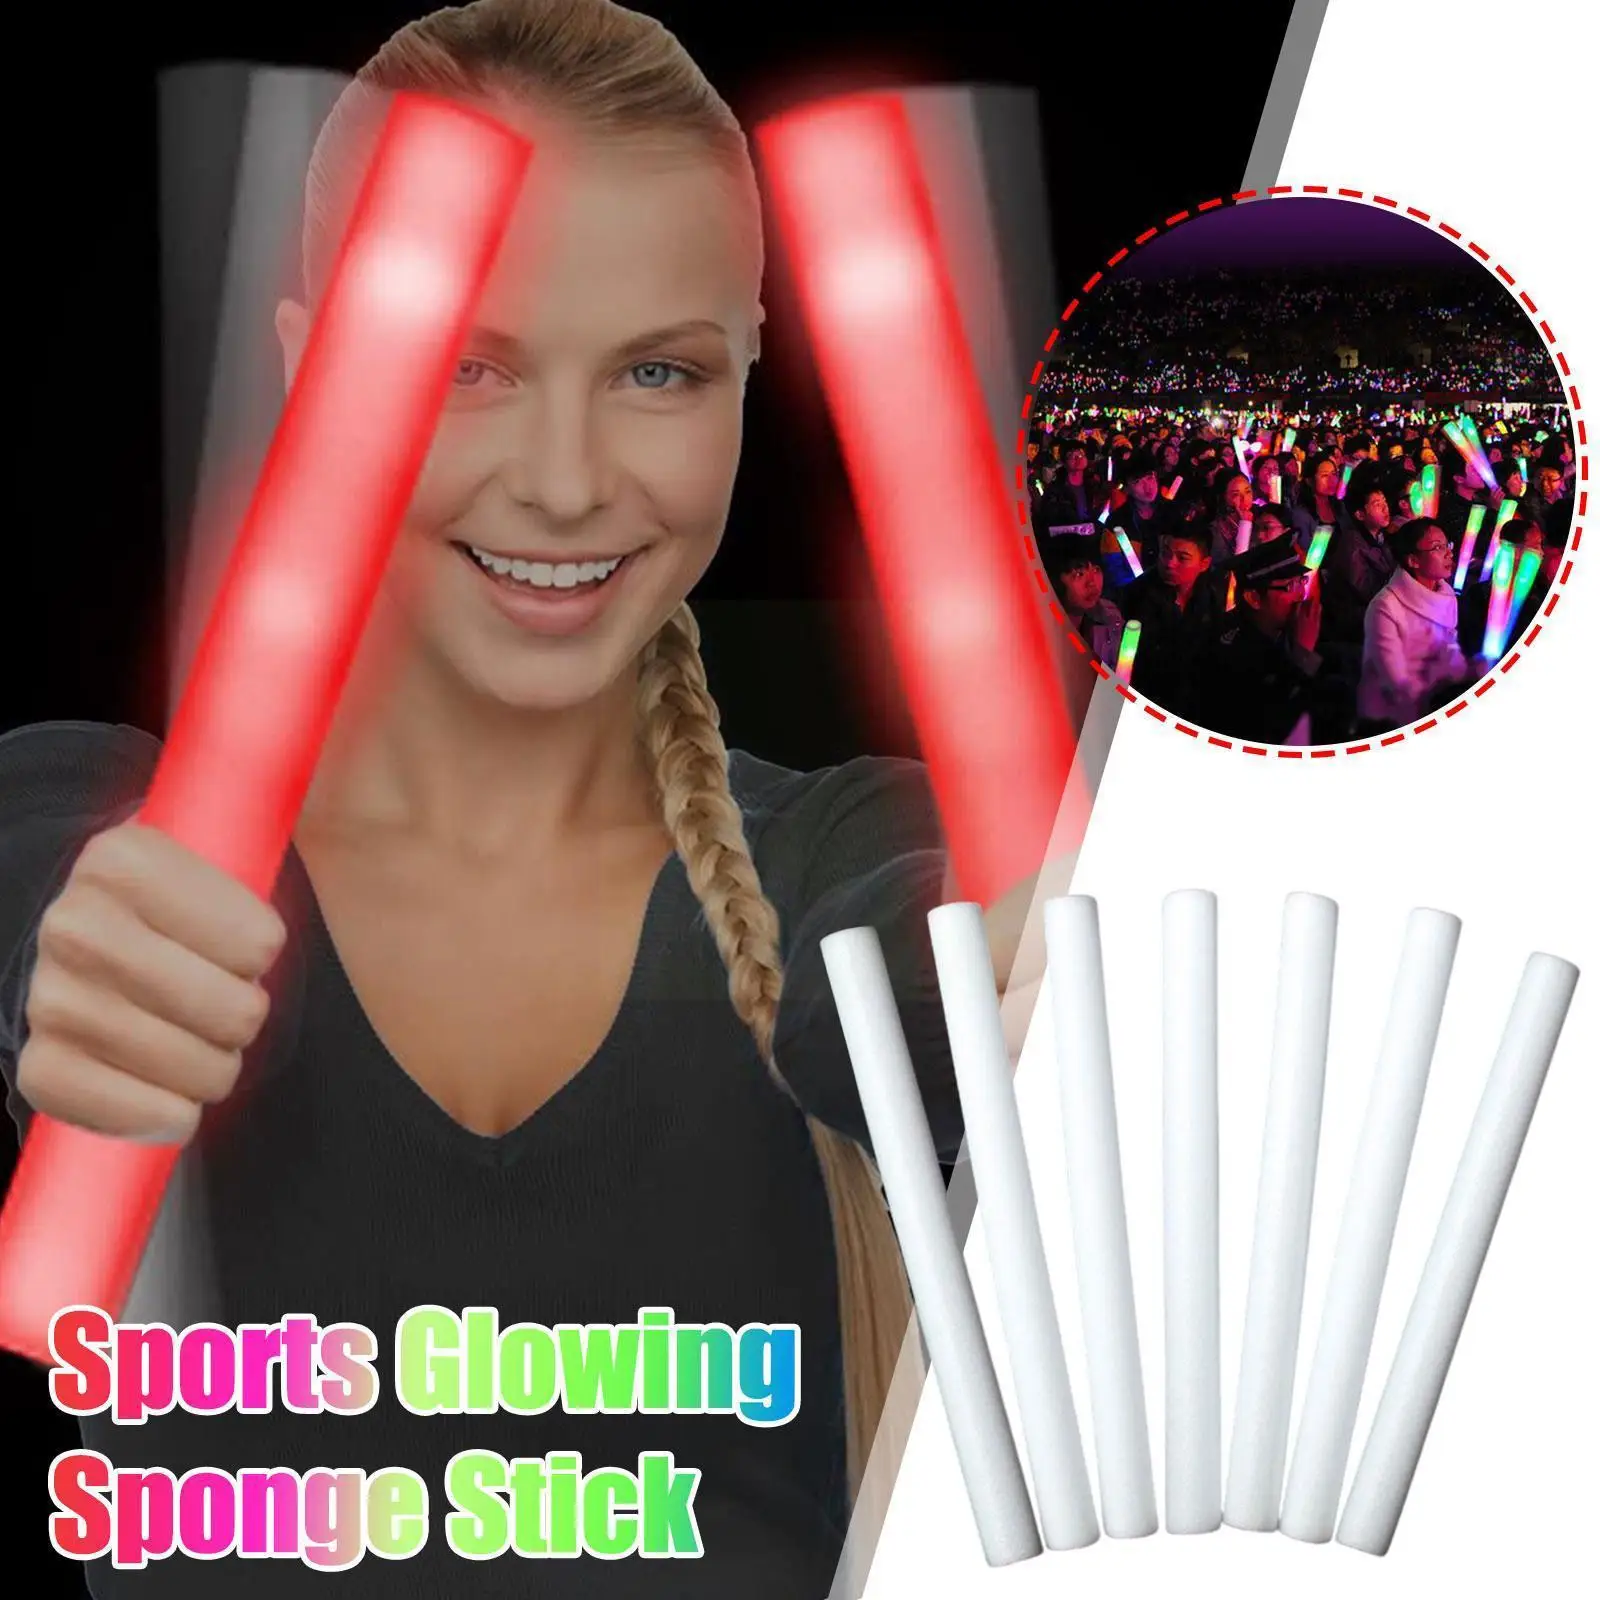 

Glow Sticks Colorful Led Foam Stick Glow Sticks Cheer Tube Diy Led Glow In The Dark Light For Concert Party Carnival Rave B6m7